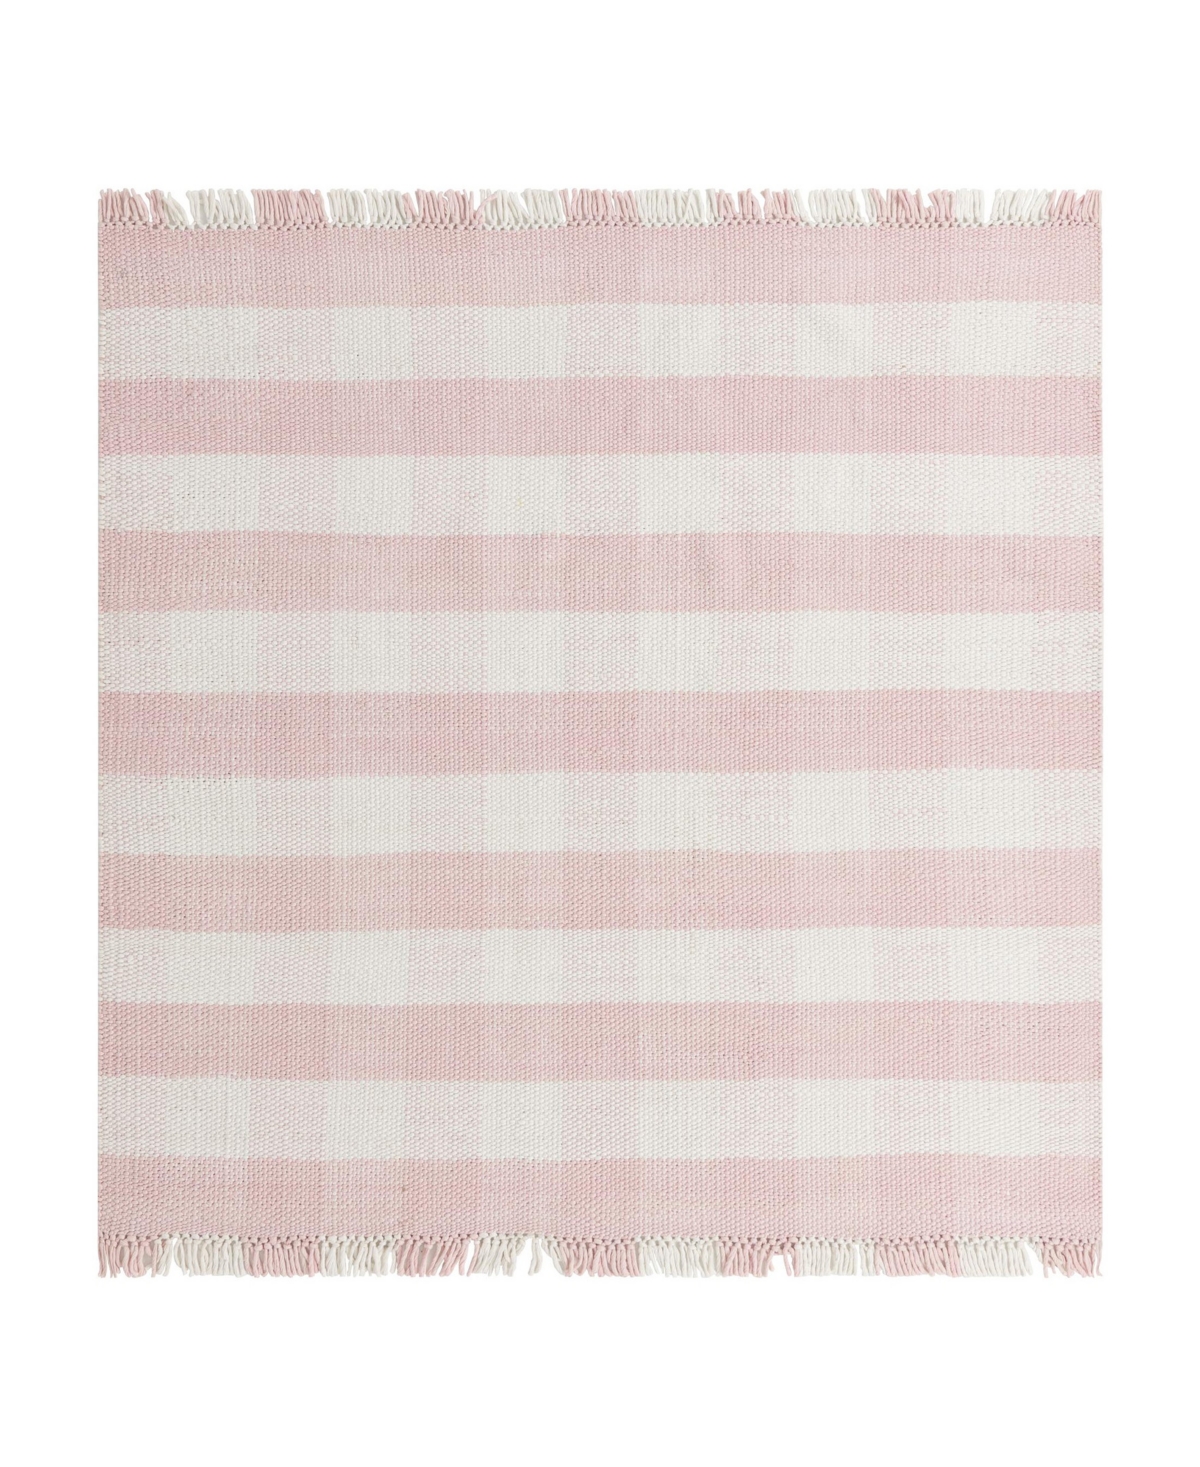 BAYSHORE HOME PURE PLAID INDOOR OUTDOOR WASHABLE PPD-01 7'10" X 7'10" SQUARE AREA RUG